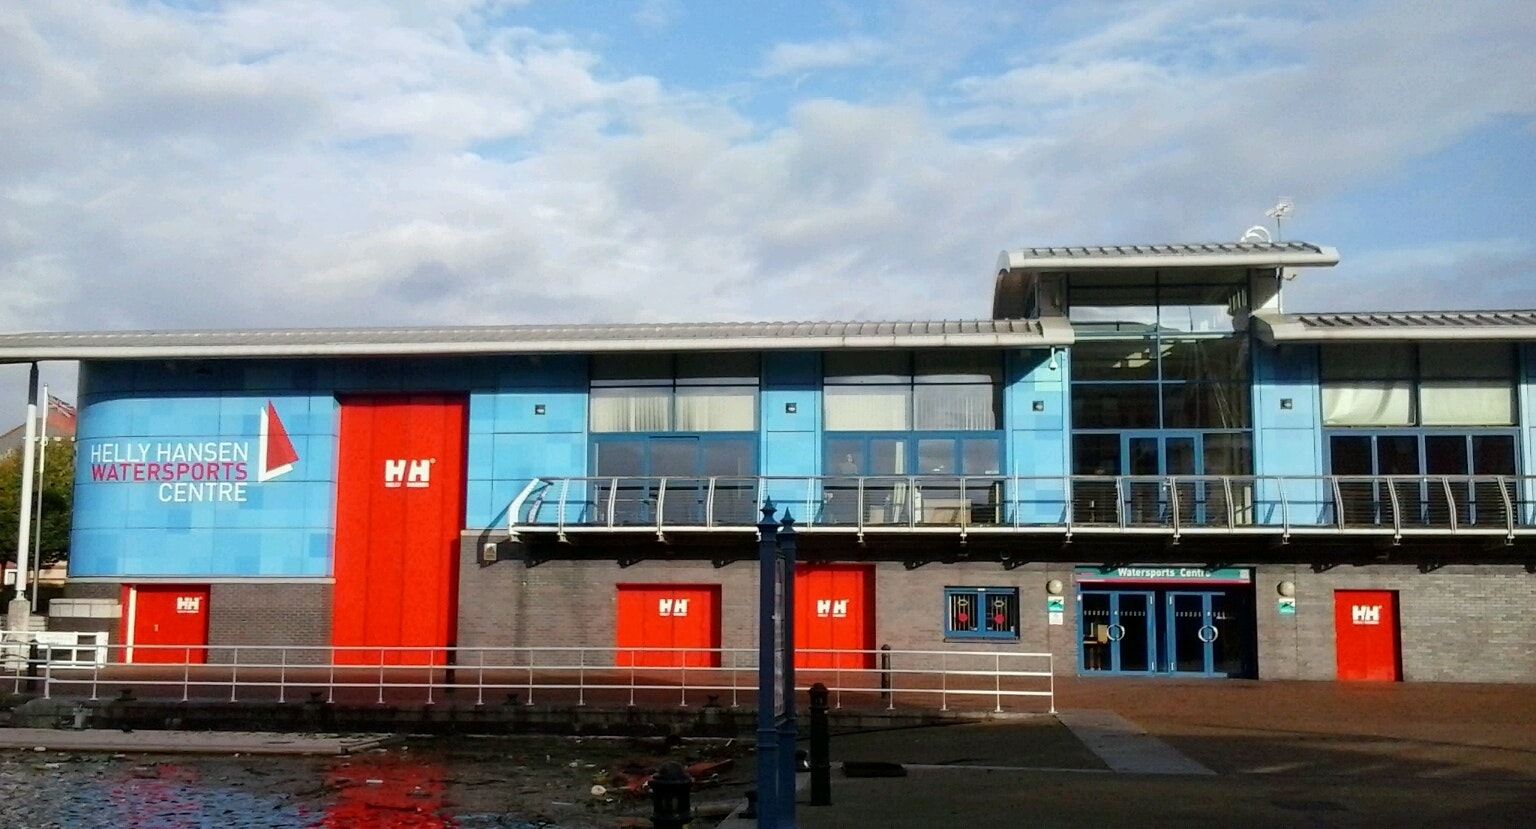 Team Building Venues in Manchester - Helly Hansen Watersports Centre